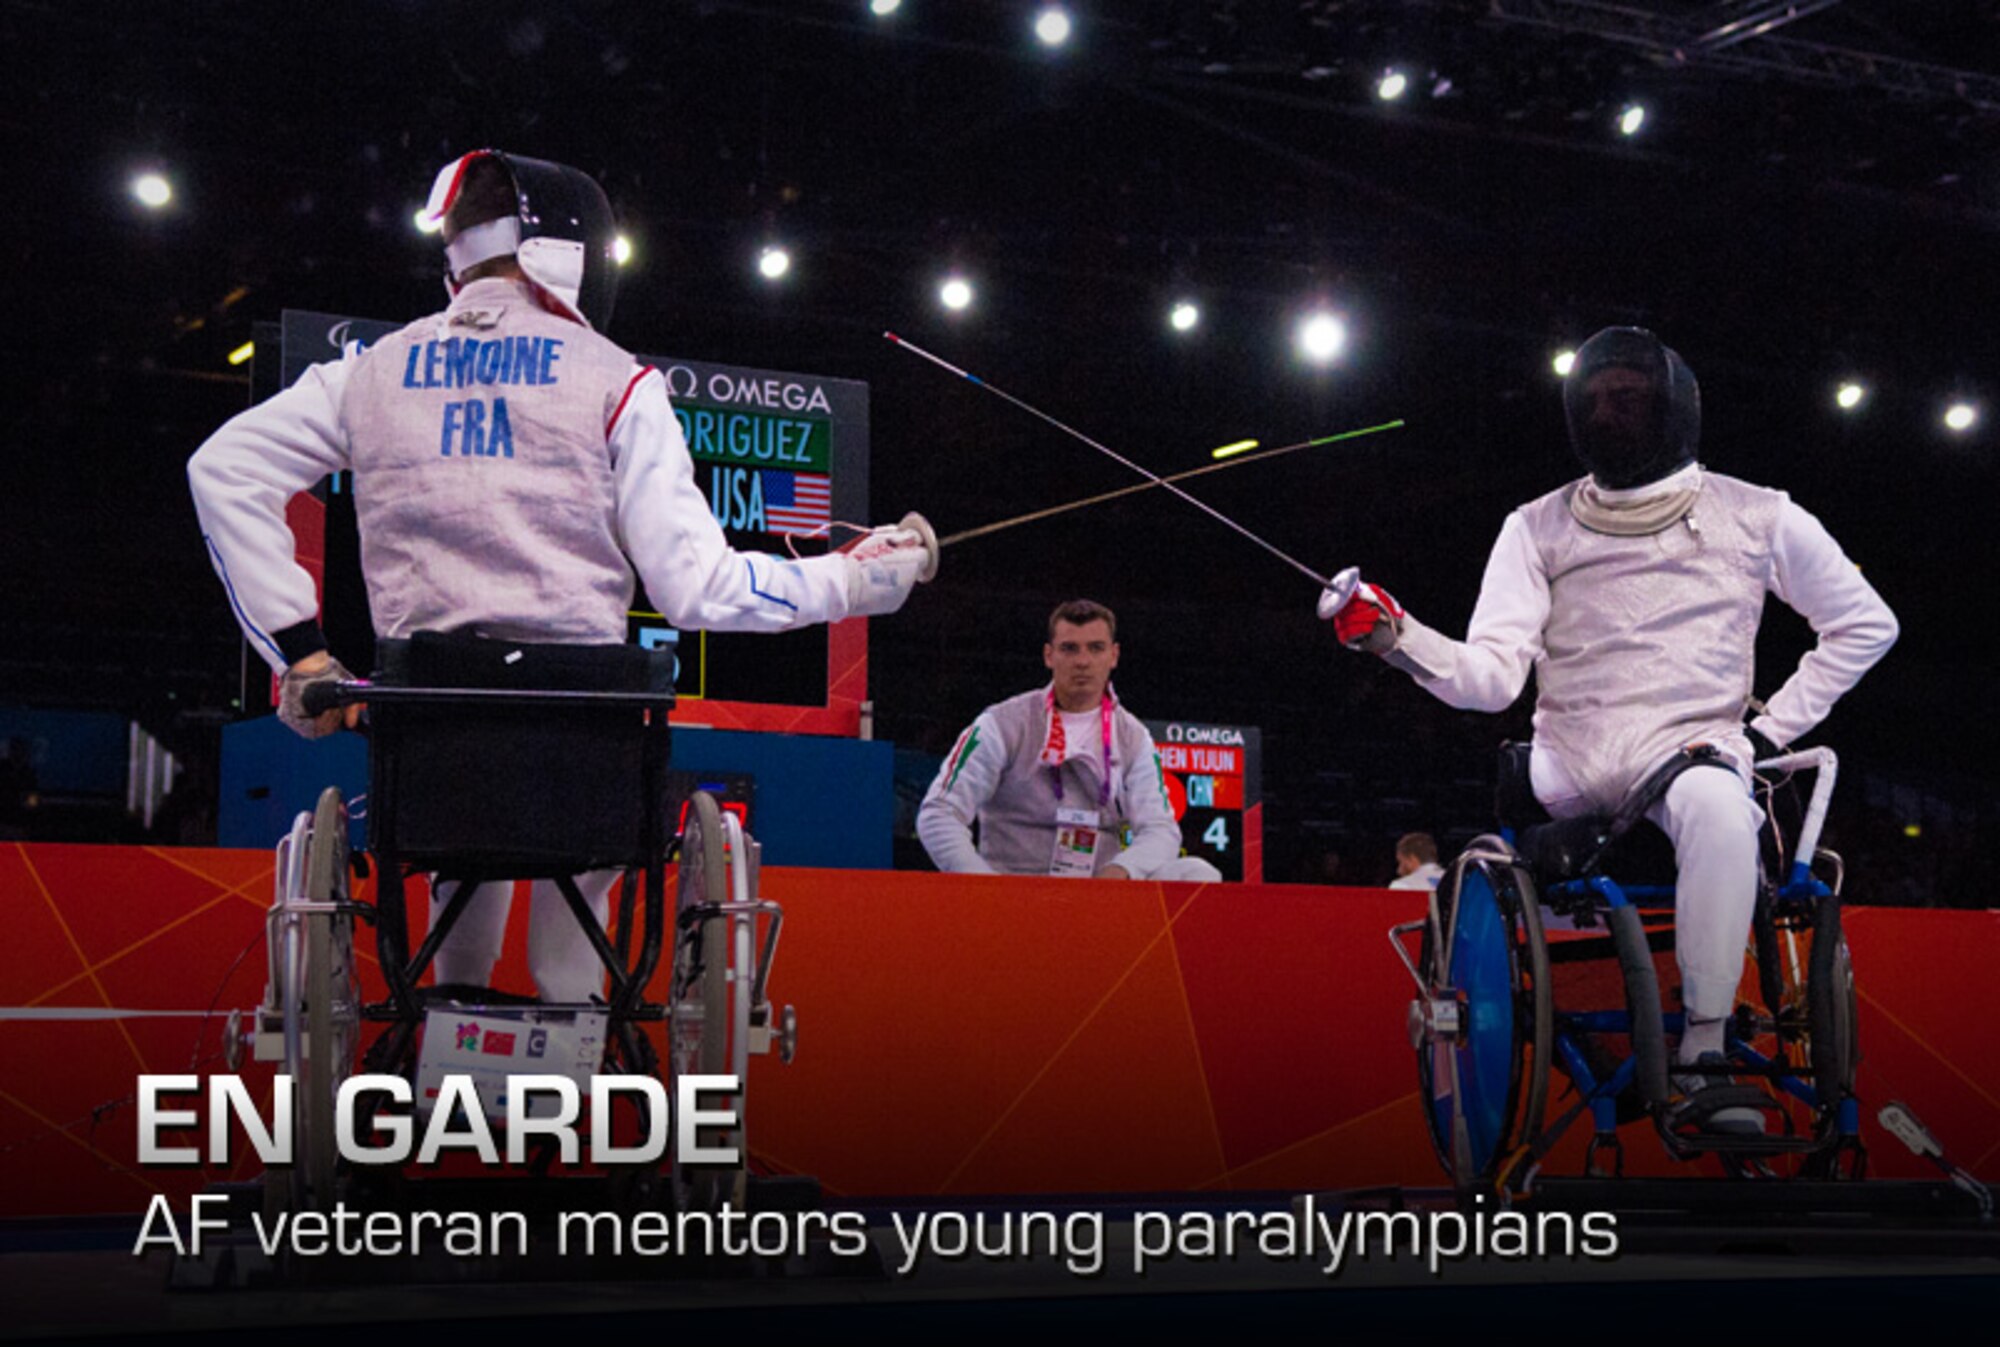 Former Air Force Staff Sgt. Mario Rodriguez, right, a member of the 2012 U.S. Paralympic fencing team, squares off with France's Ludov LeMoine during the Paralympic Games in London, on Sept. 4, 2012. Rodriguez elected to have his leg removed in 1992 after an untreatable tumor was discovered. (Department of Defense photo/Sgt. 1st Class Tyrone C. Marshall Jr.)